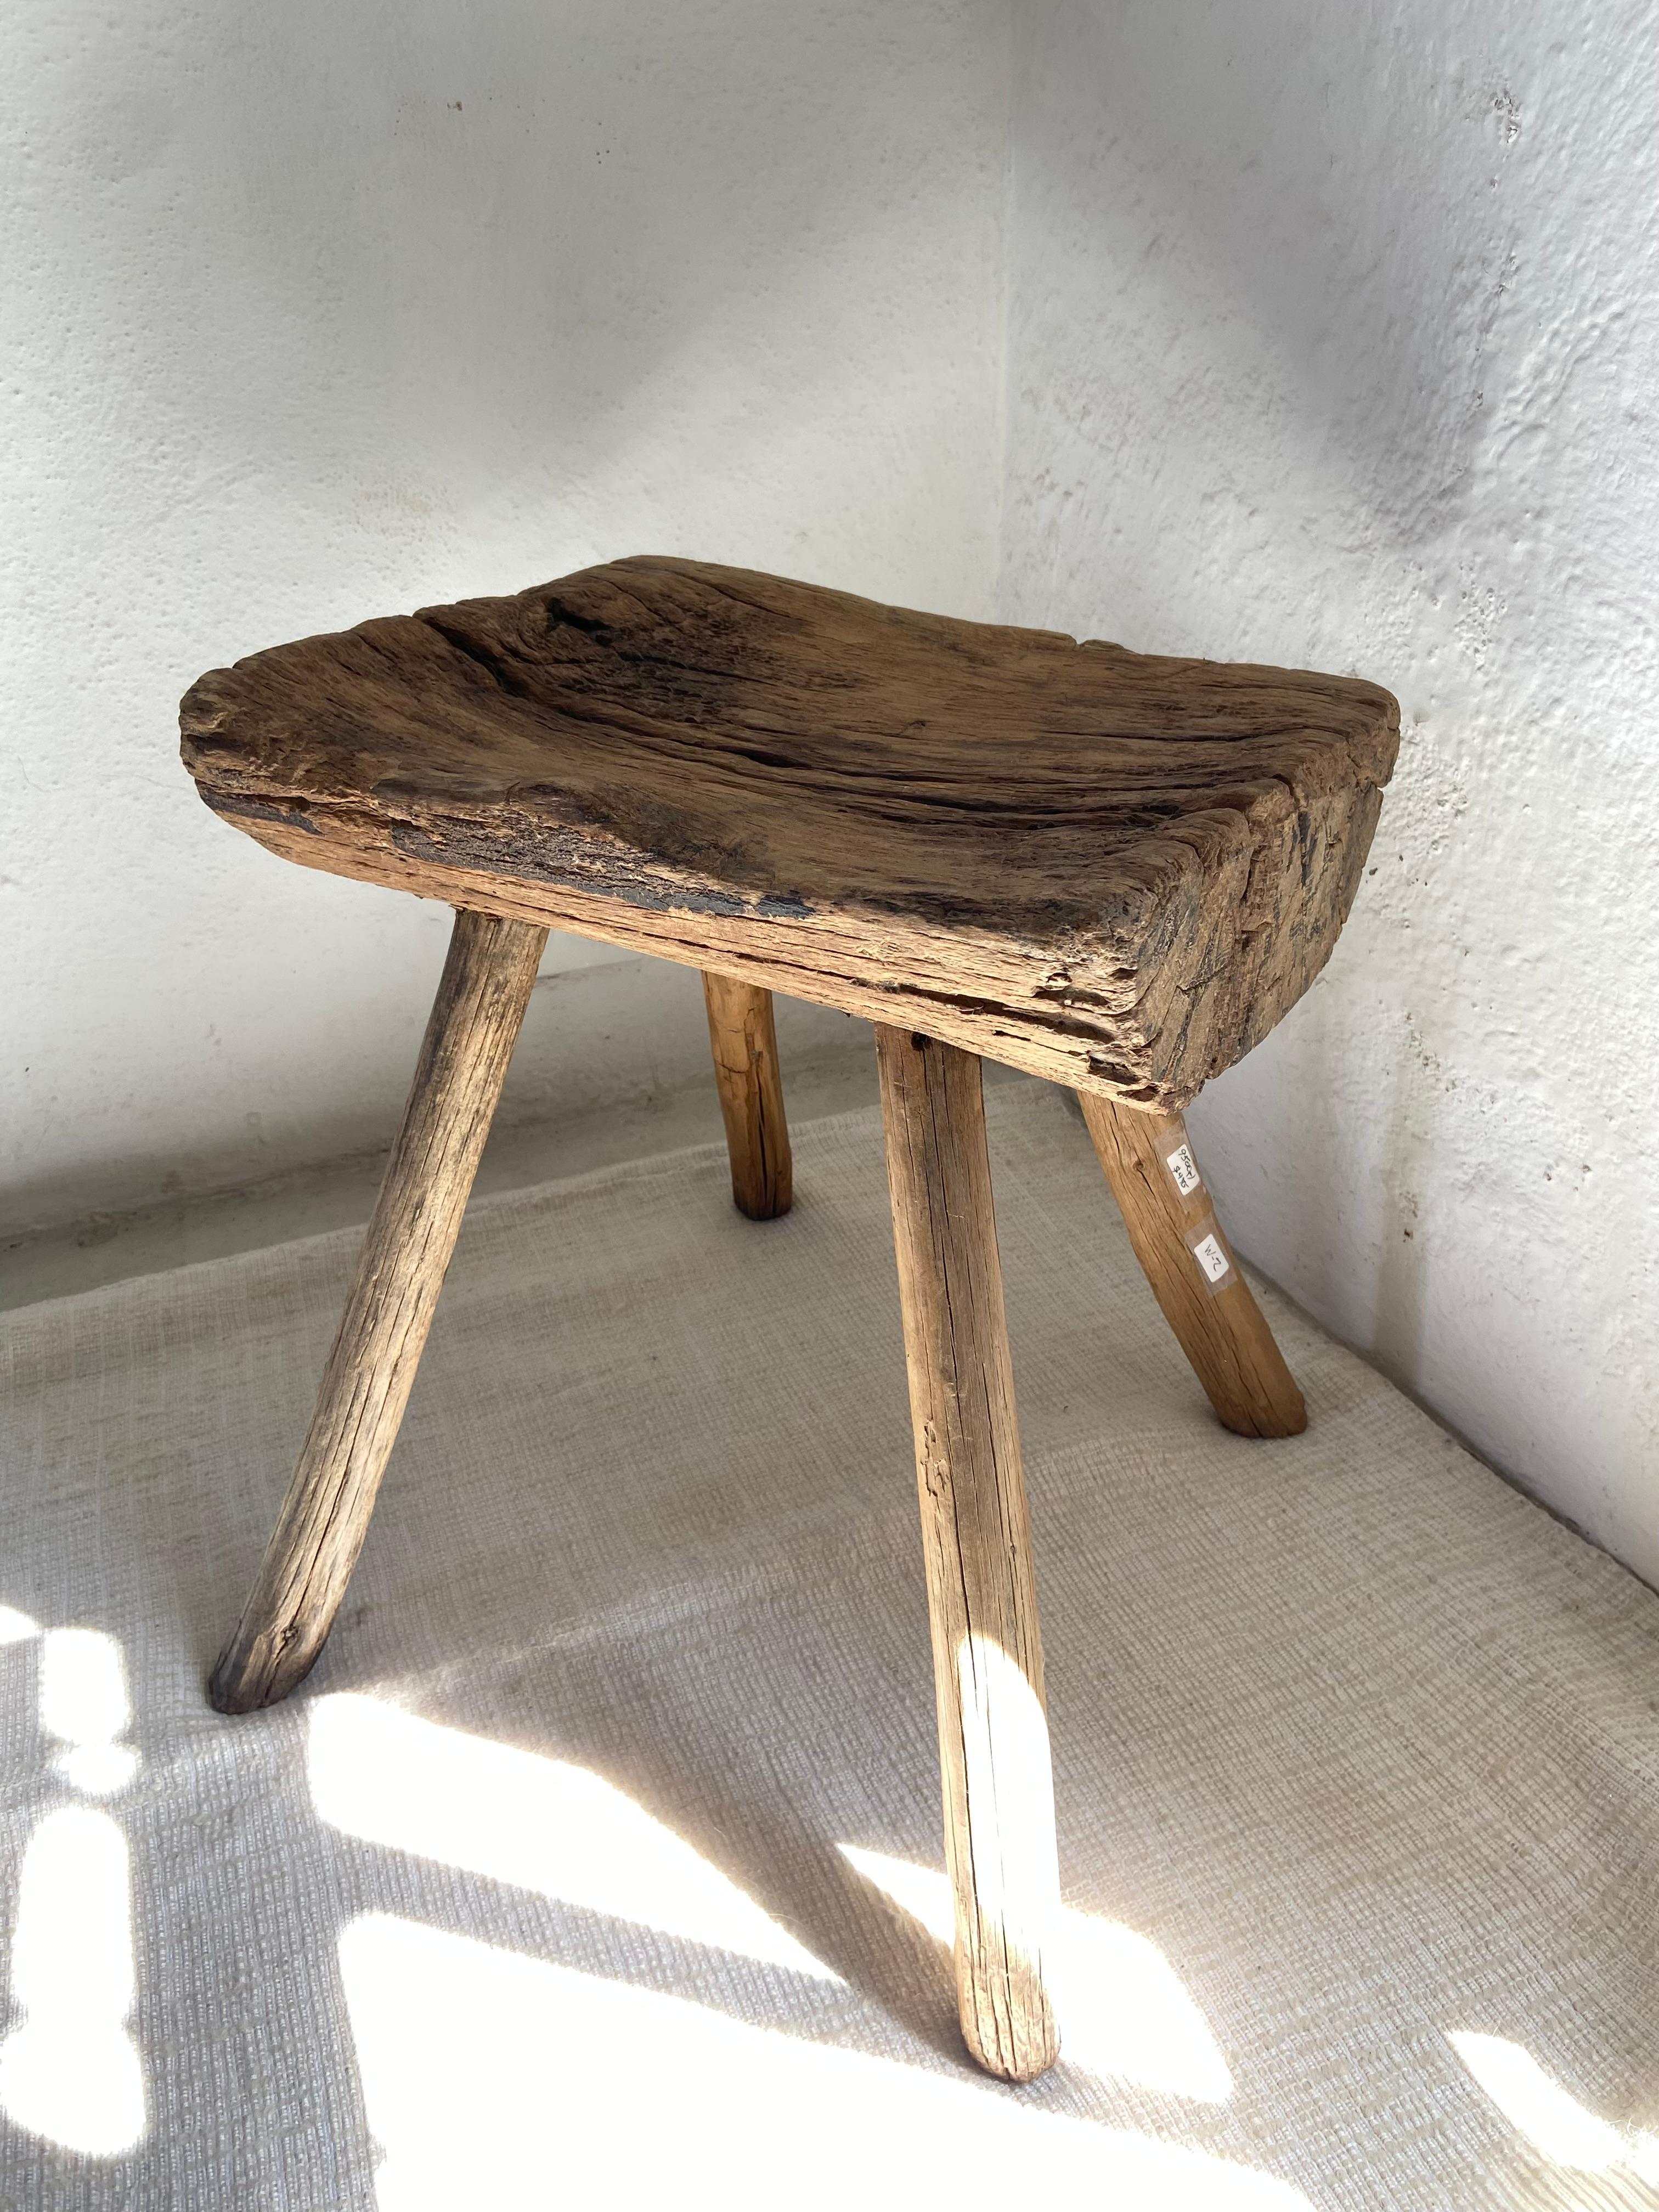 Primitive End Trunk Stool by Artefakto
Unique piece.
Dimensions: D 30 x W 42 x H 42 cm.
Materials: Wood.
Queretaro, Mexico 1950 ´s.

Artefakto opened its doors on the Riviera Nayarit coastline in 2010. With an unrelenting passion for all